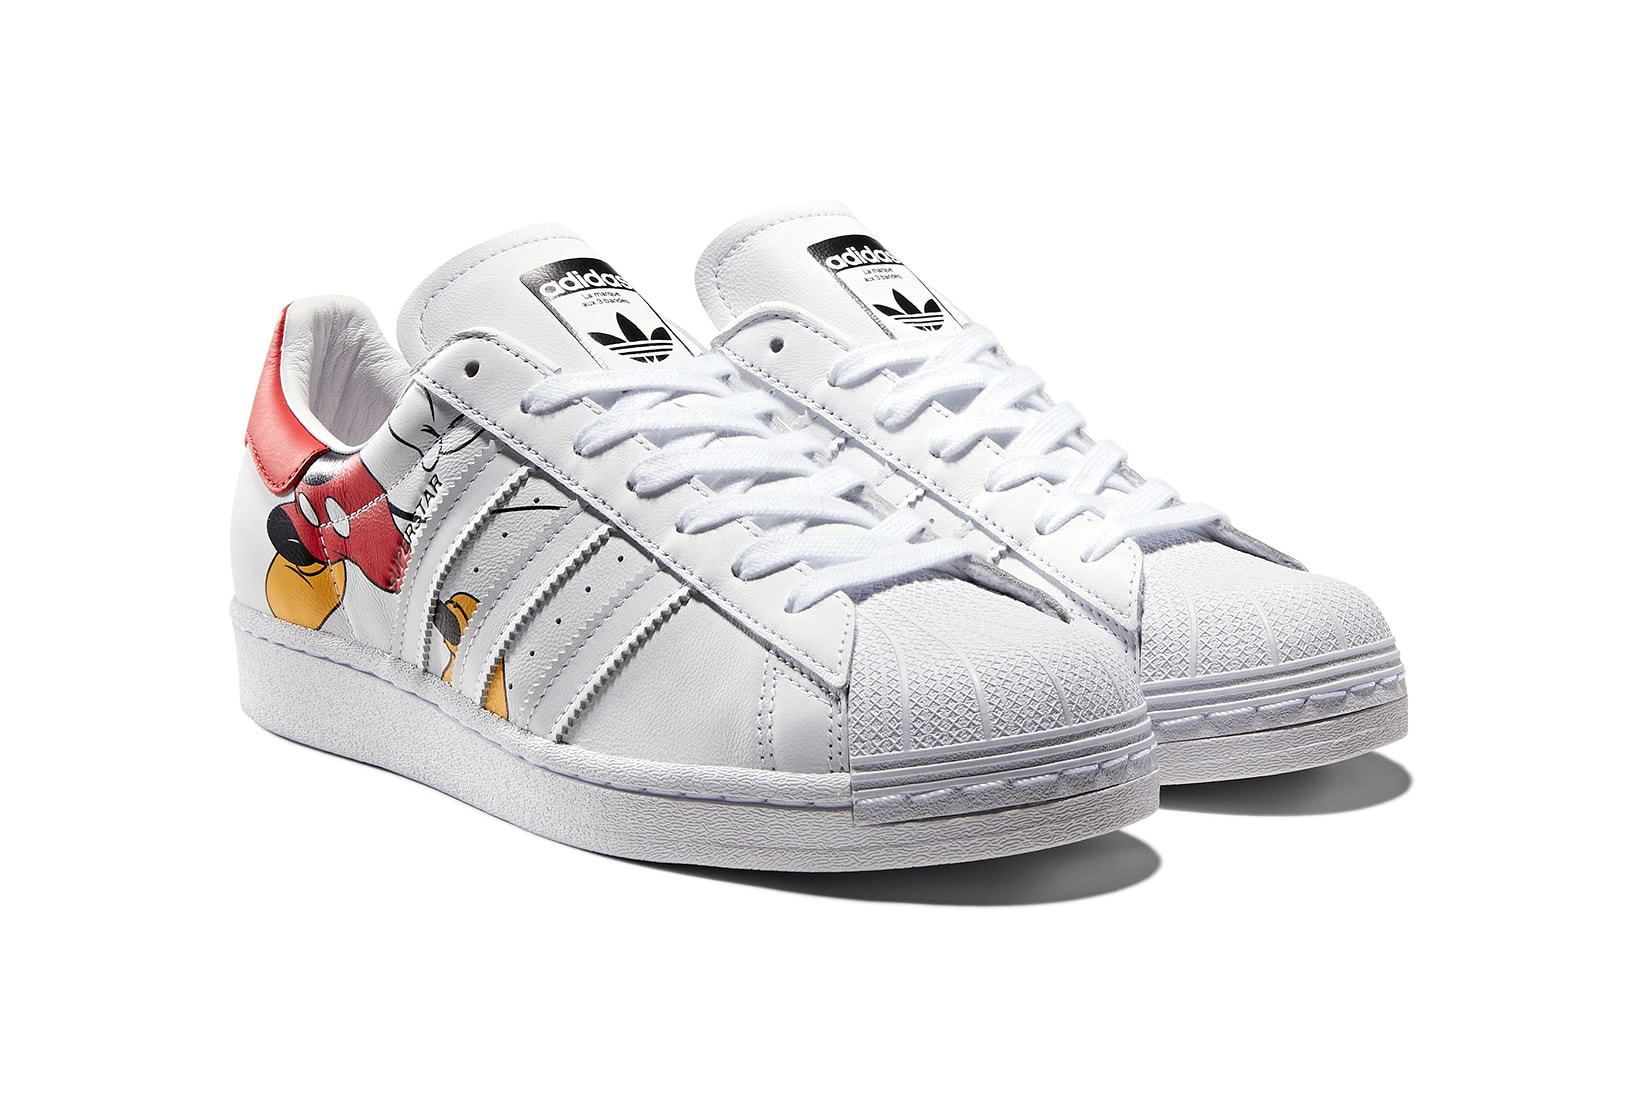 adidas originals chinese new year mickey mouse disney collaboration stan smith sneakers white 3d graphics shoes footwear sneakerhead